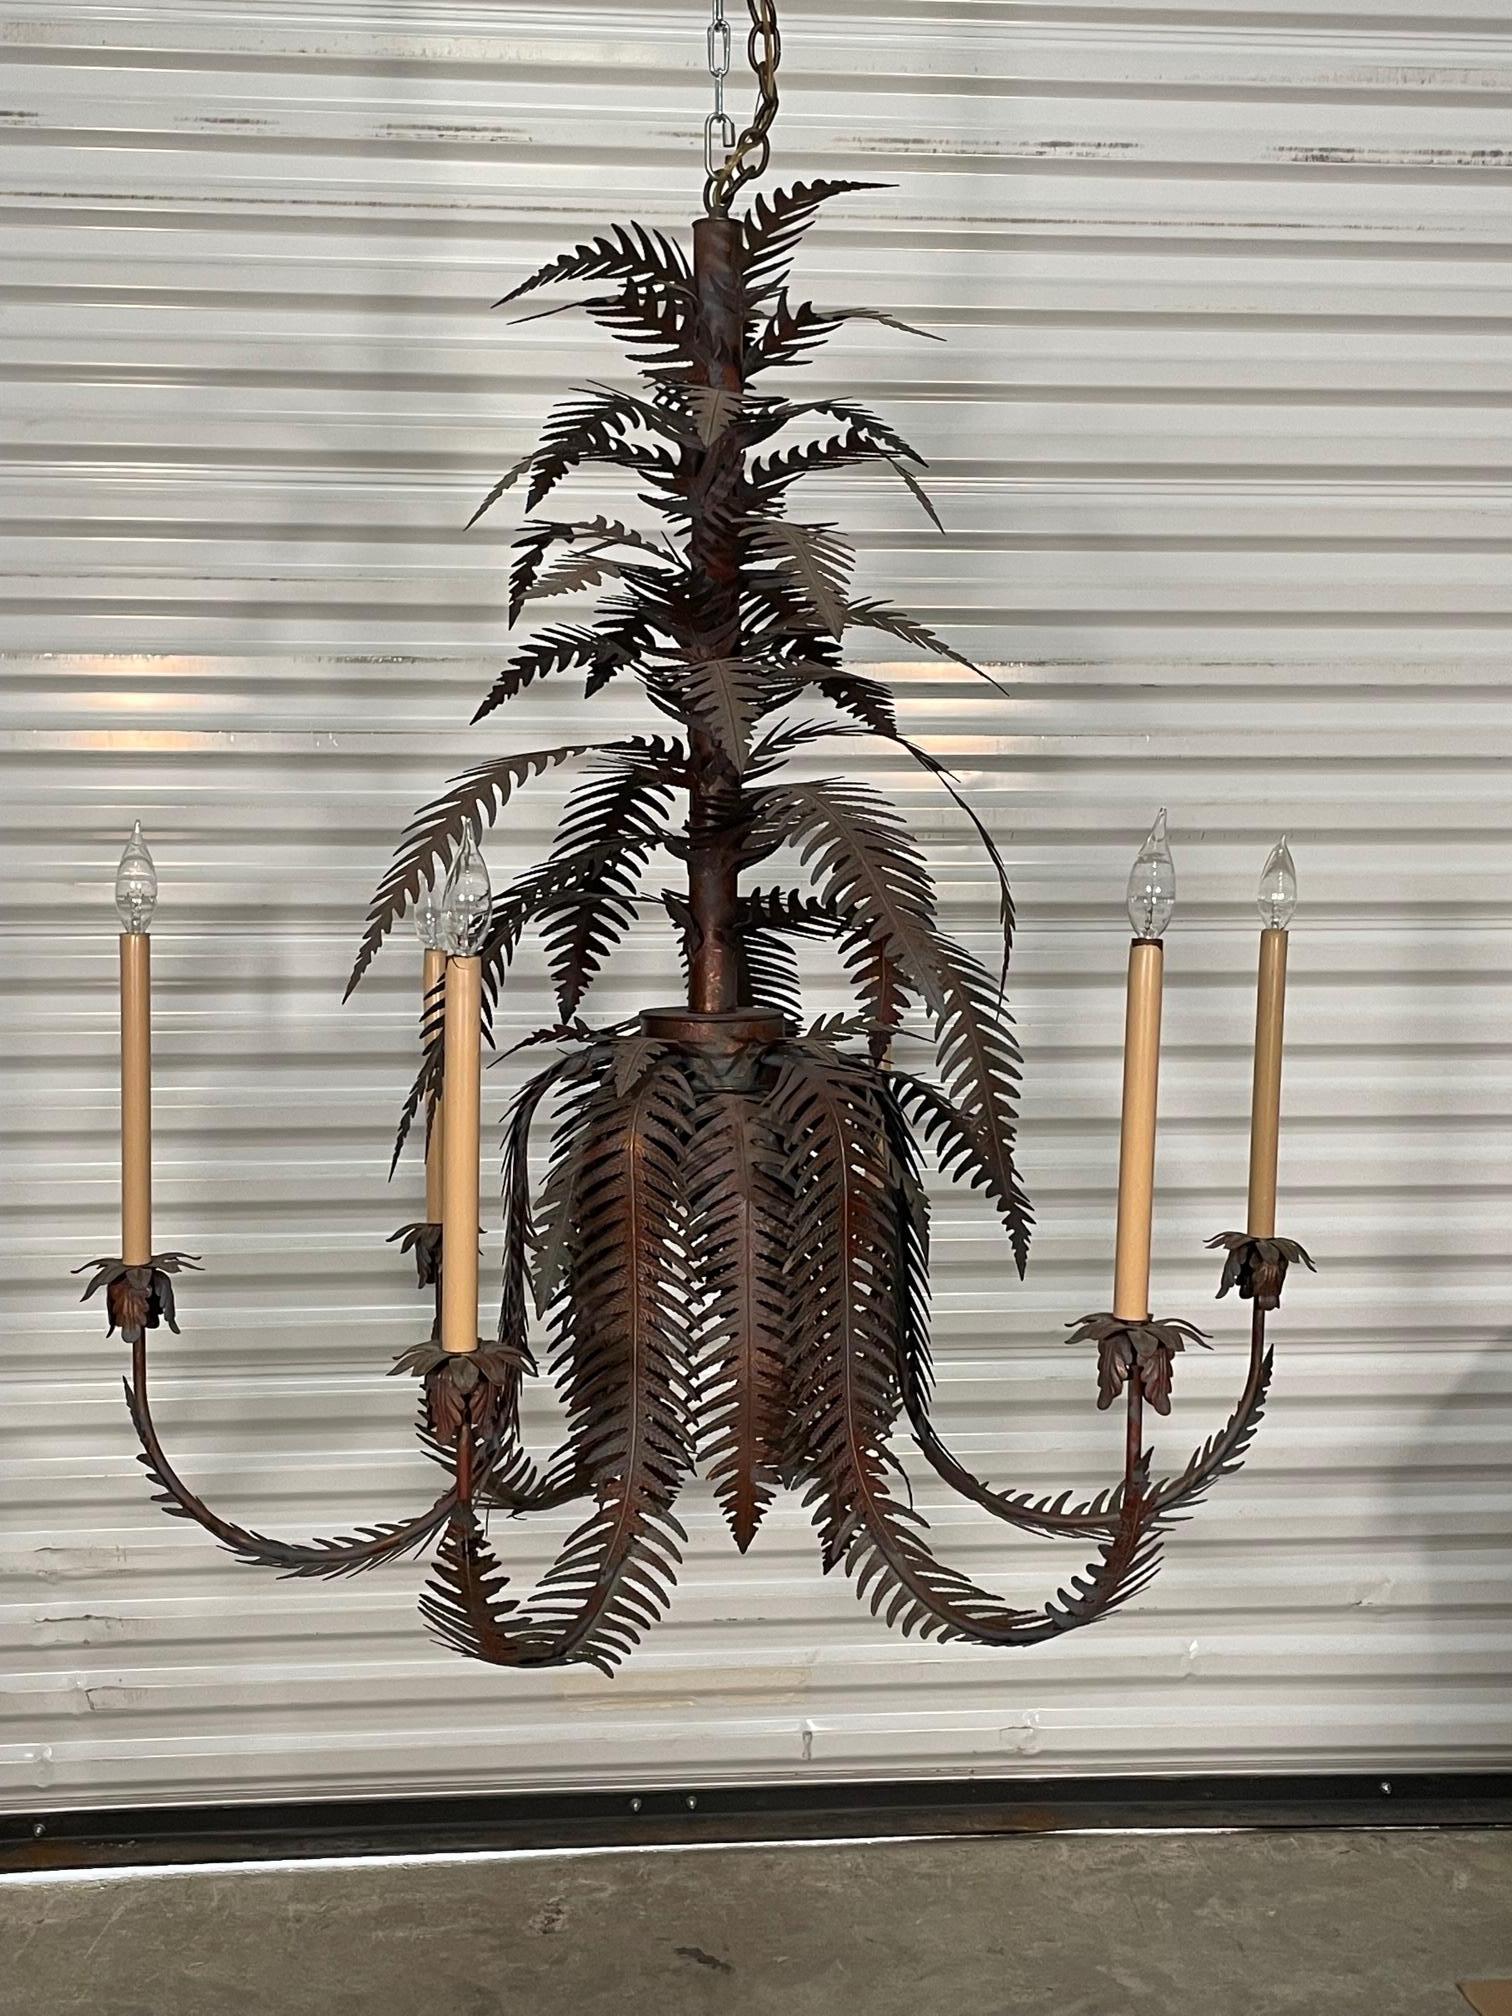 Large tole chandelier features sculptural fern leaves and six arms. A unique twist on traditional tole palm frond chandeliers. Good condition with imperfections consistent with age. May exhibit scuffs, marks, or wear, see photos for details.